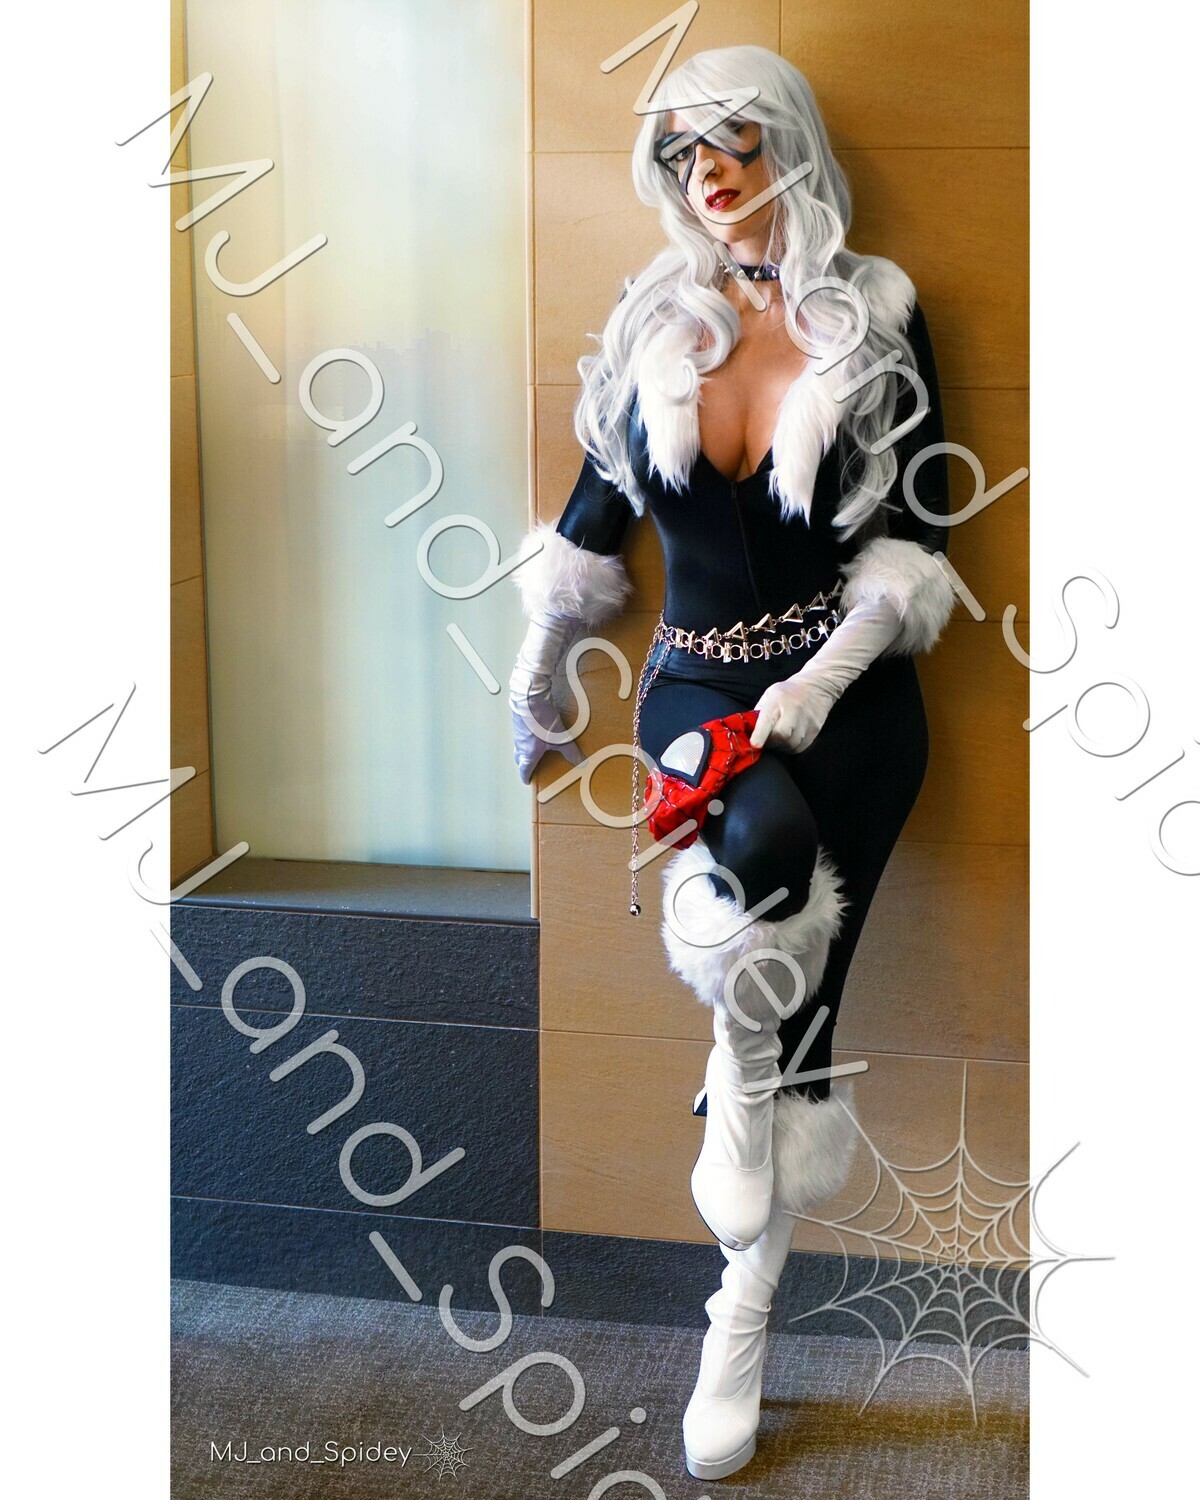 Marvel - Spider-Man - Black Cat - Classic 2 -  Cosplay Print (@MJ_and_Spidey, MJ and Spidey, Comics)